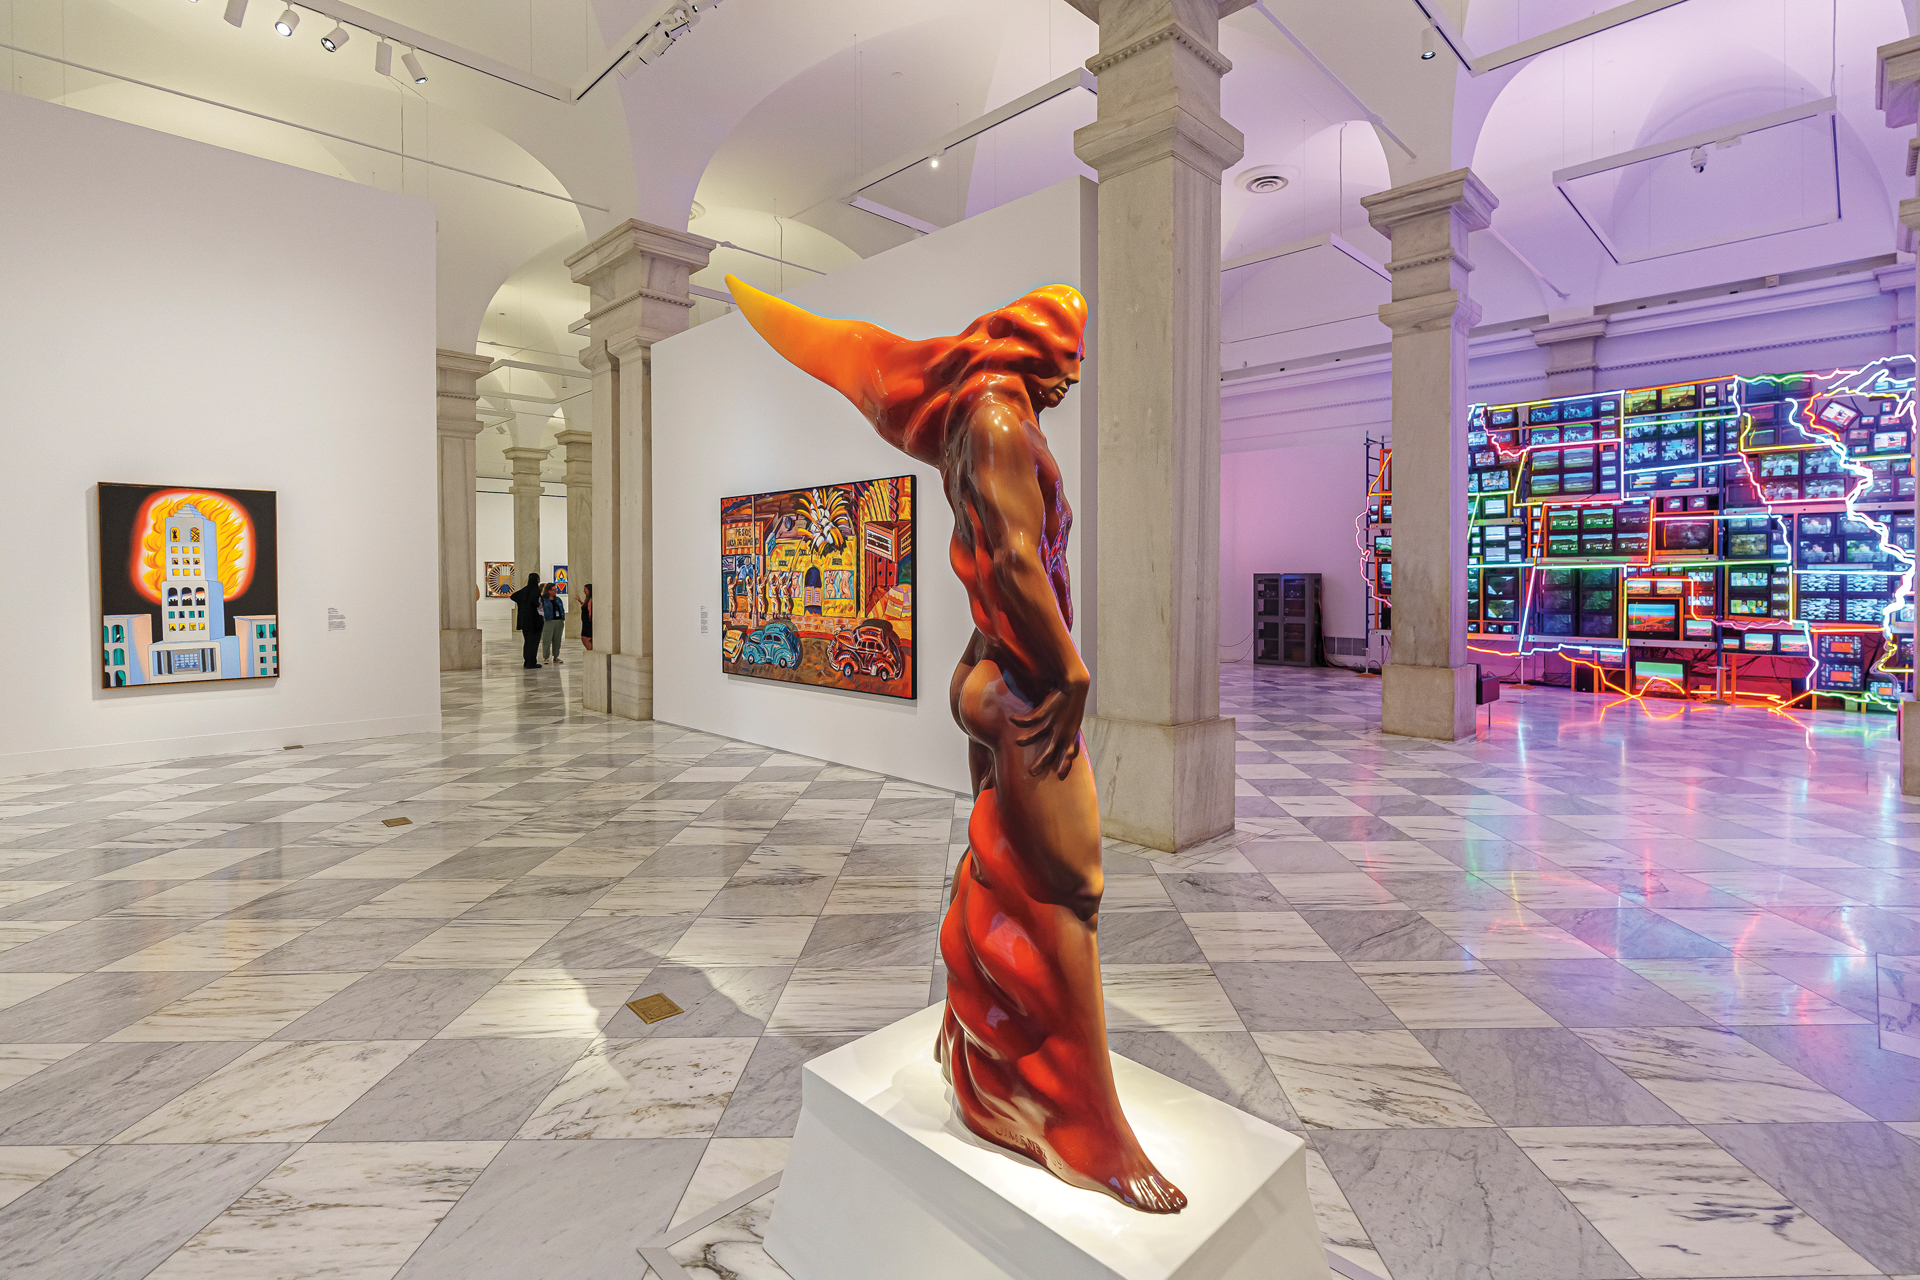 A gallery room with marble floors, a fierce figural sculpture, a neon light work, and paintings on the walls.